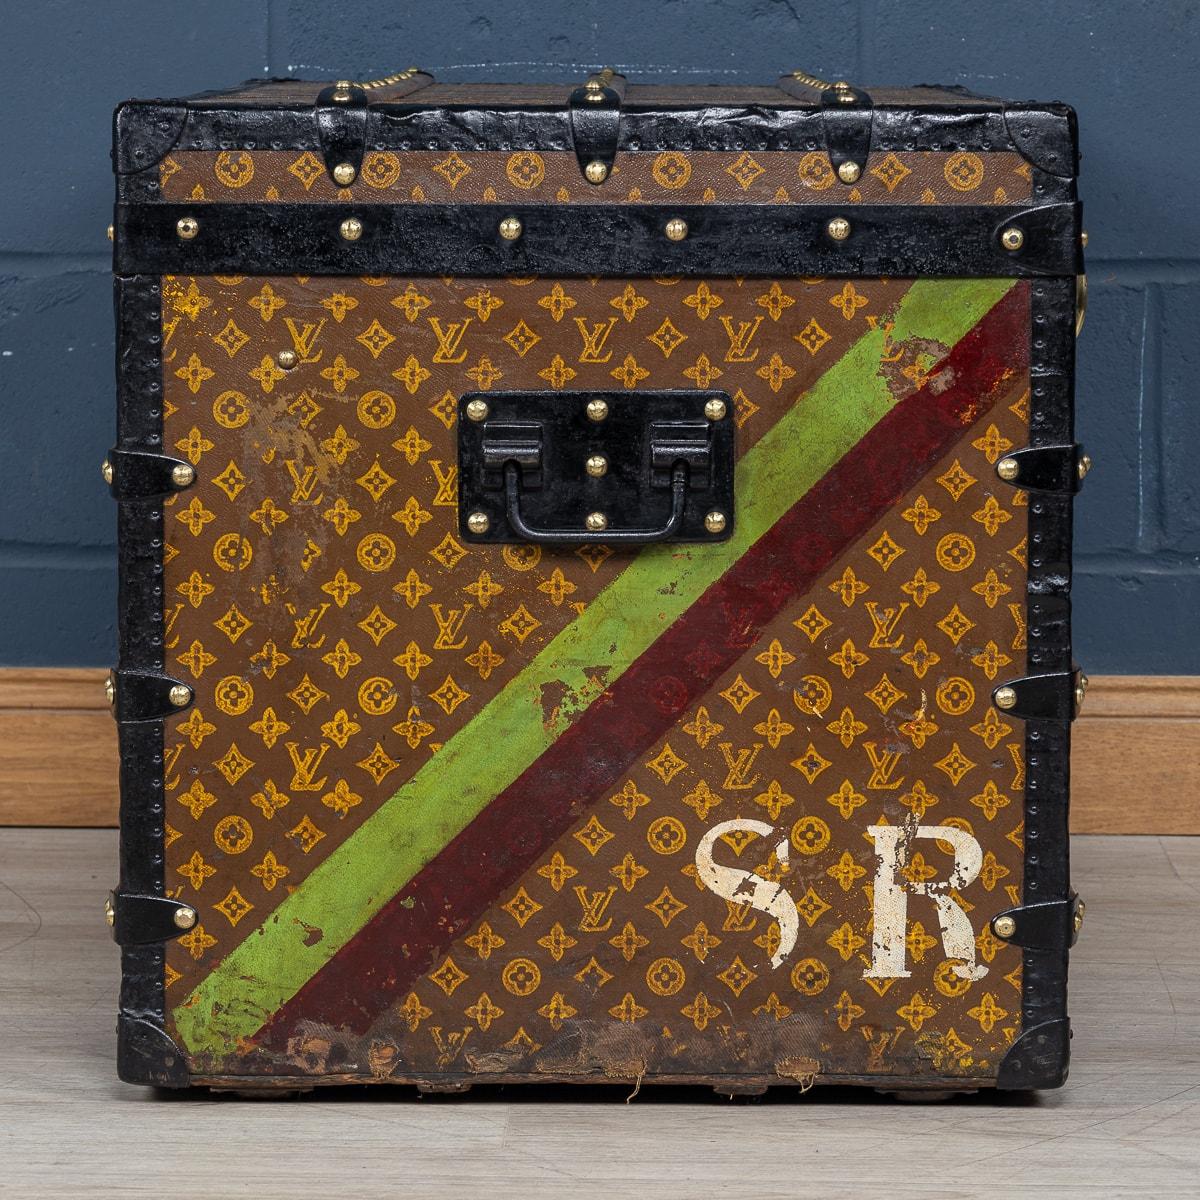 20th Century Louis Vuitton Courier Trunk In Monogram Canvas, France c.1900 In Good Condition For Sale In Royal Tunbridge Wells, Kent